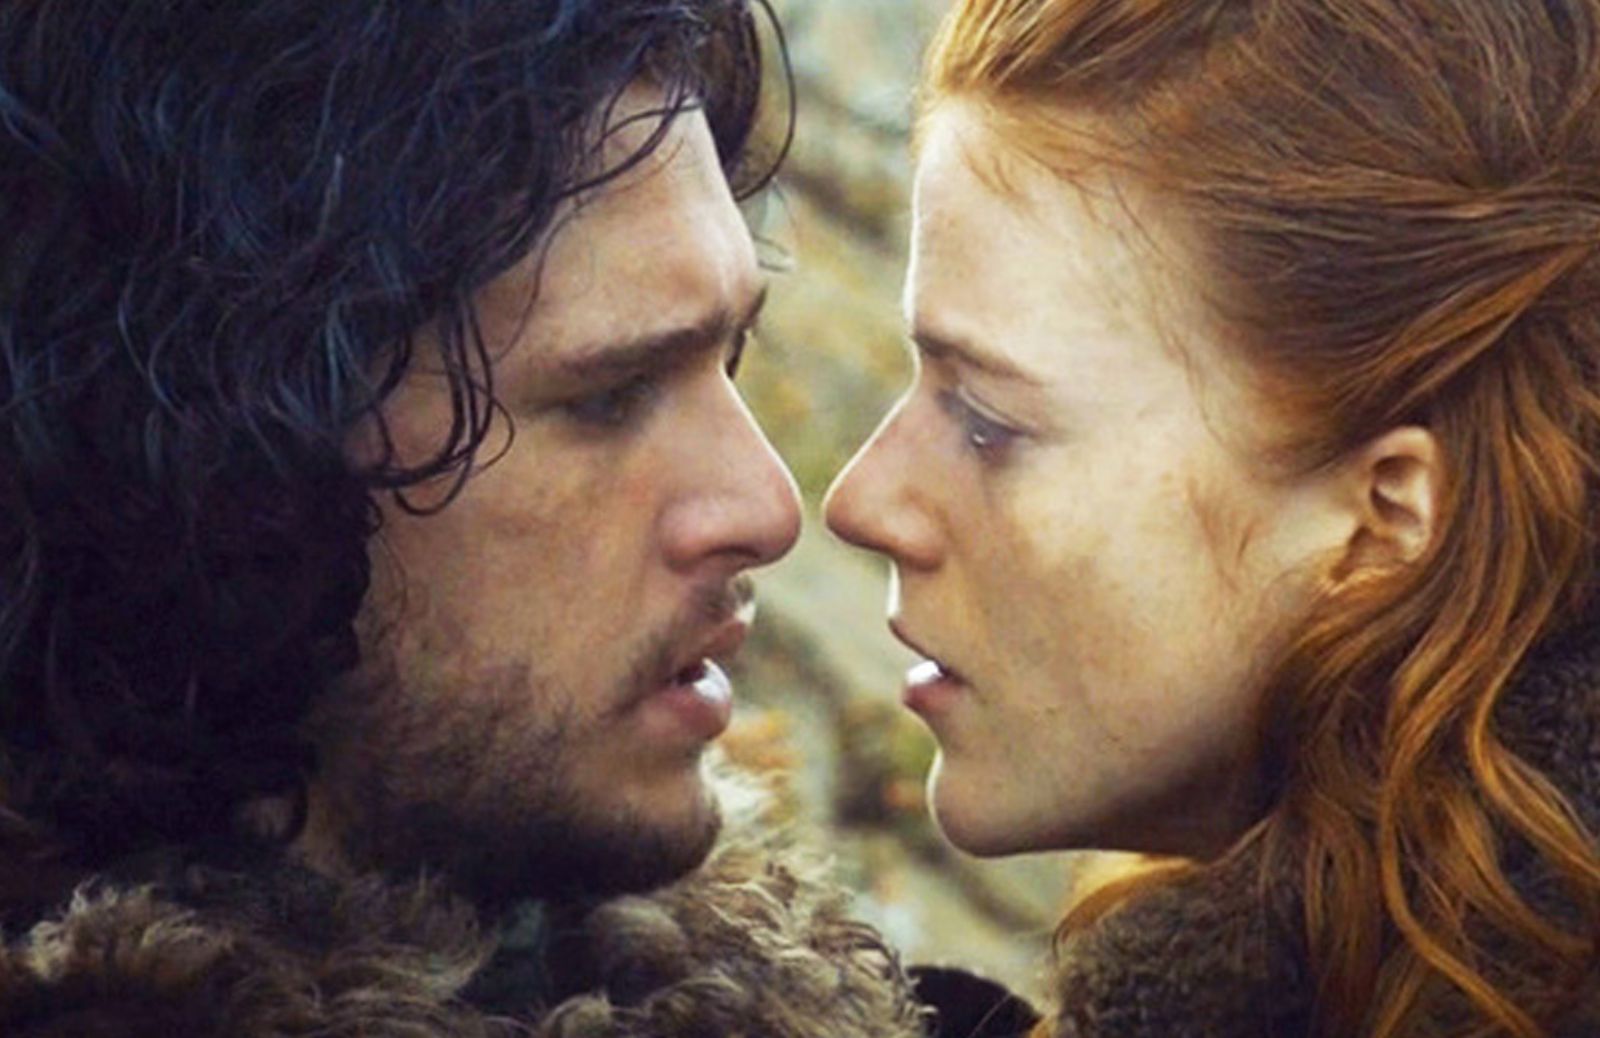 Le più belle storie d'amore di Game of Thrones